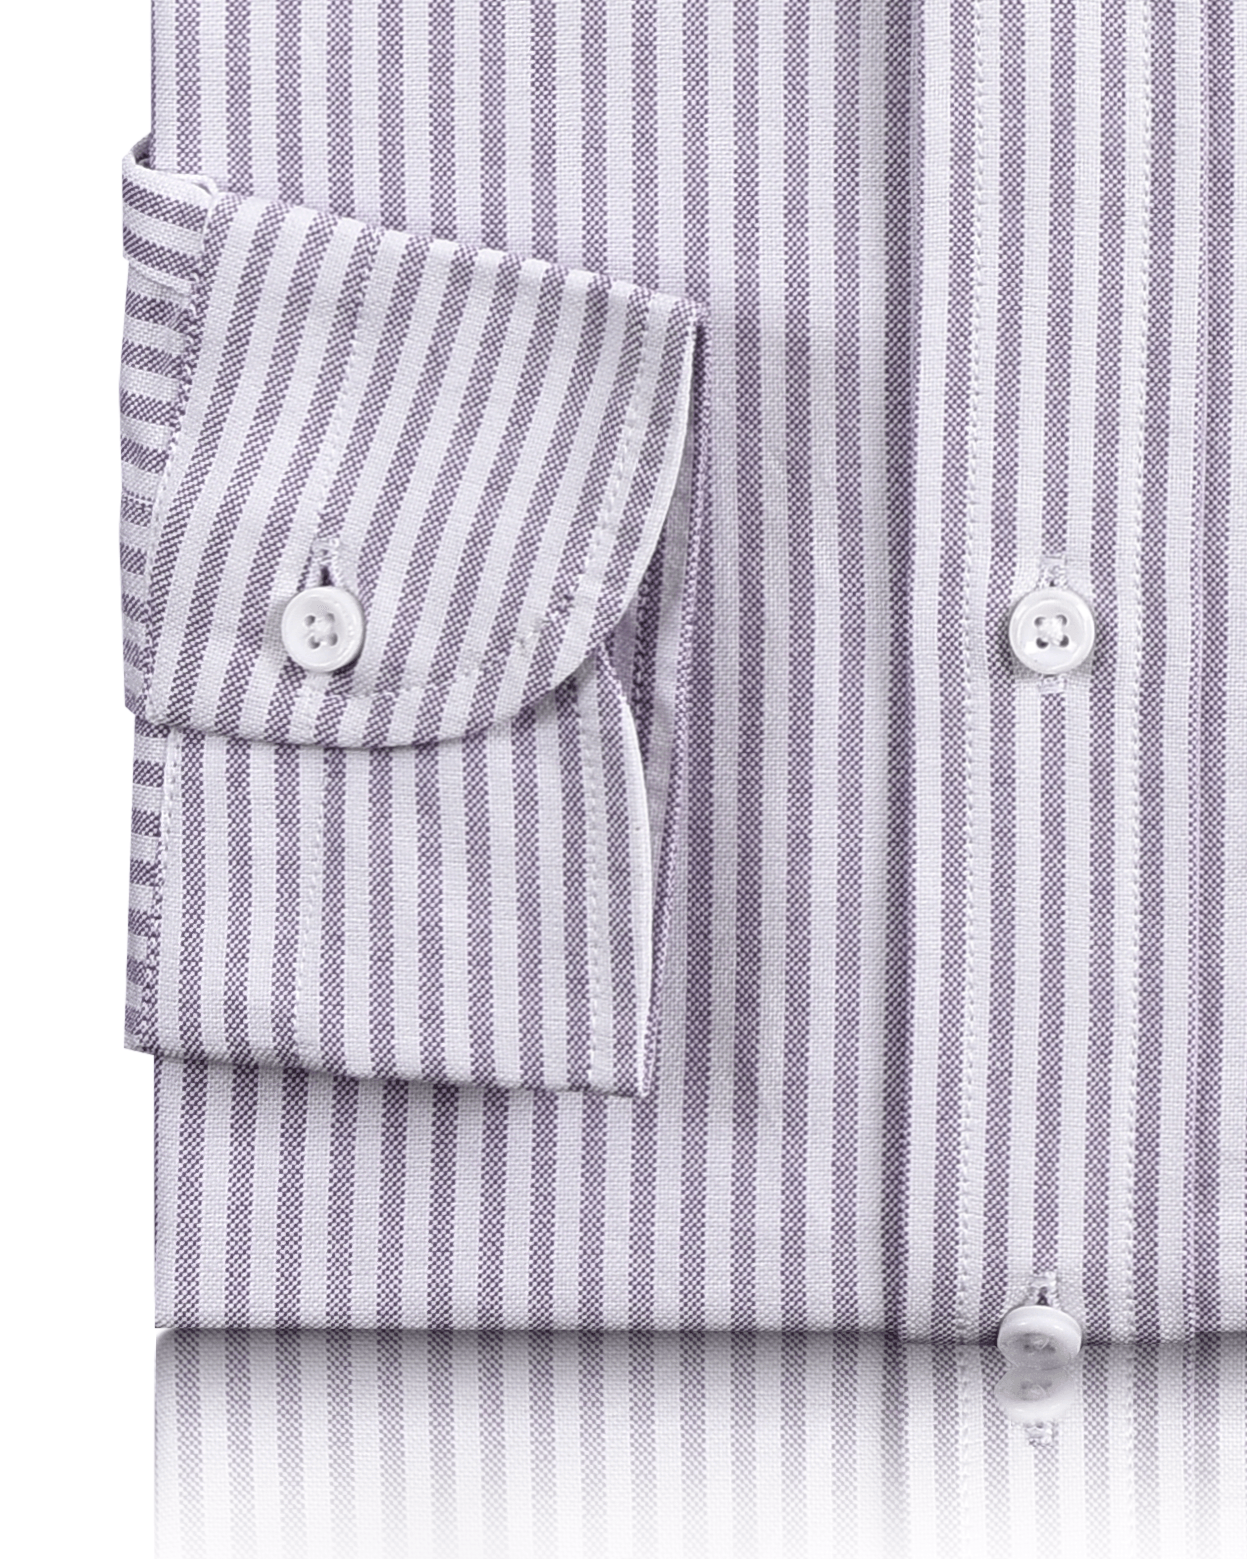 Cuff of the custom oxford shirt for men by Luxire in white with purple dress stripes